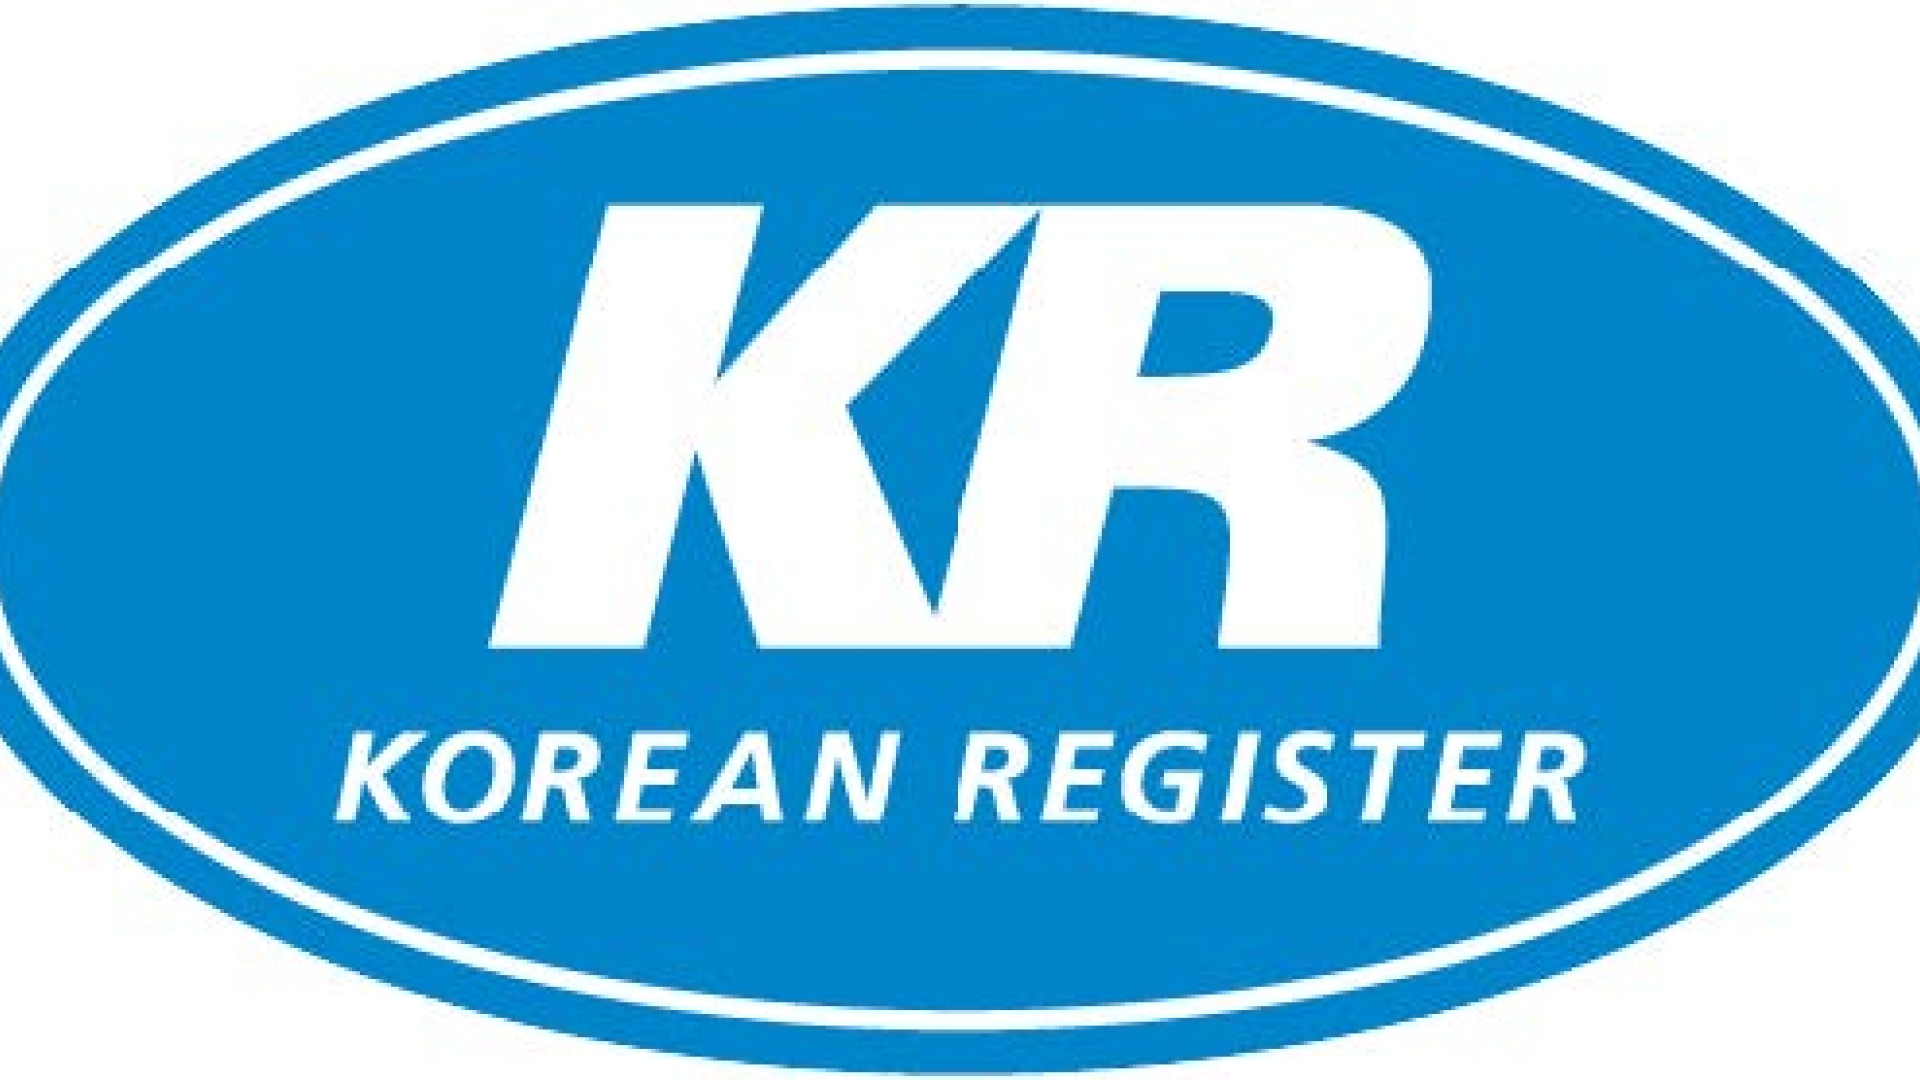 KR OF APPROVAL OF SERVICE SUPPLIER CERTIFICATE